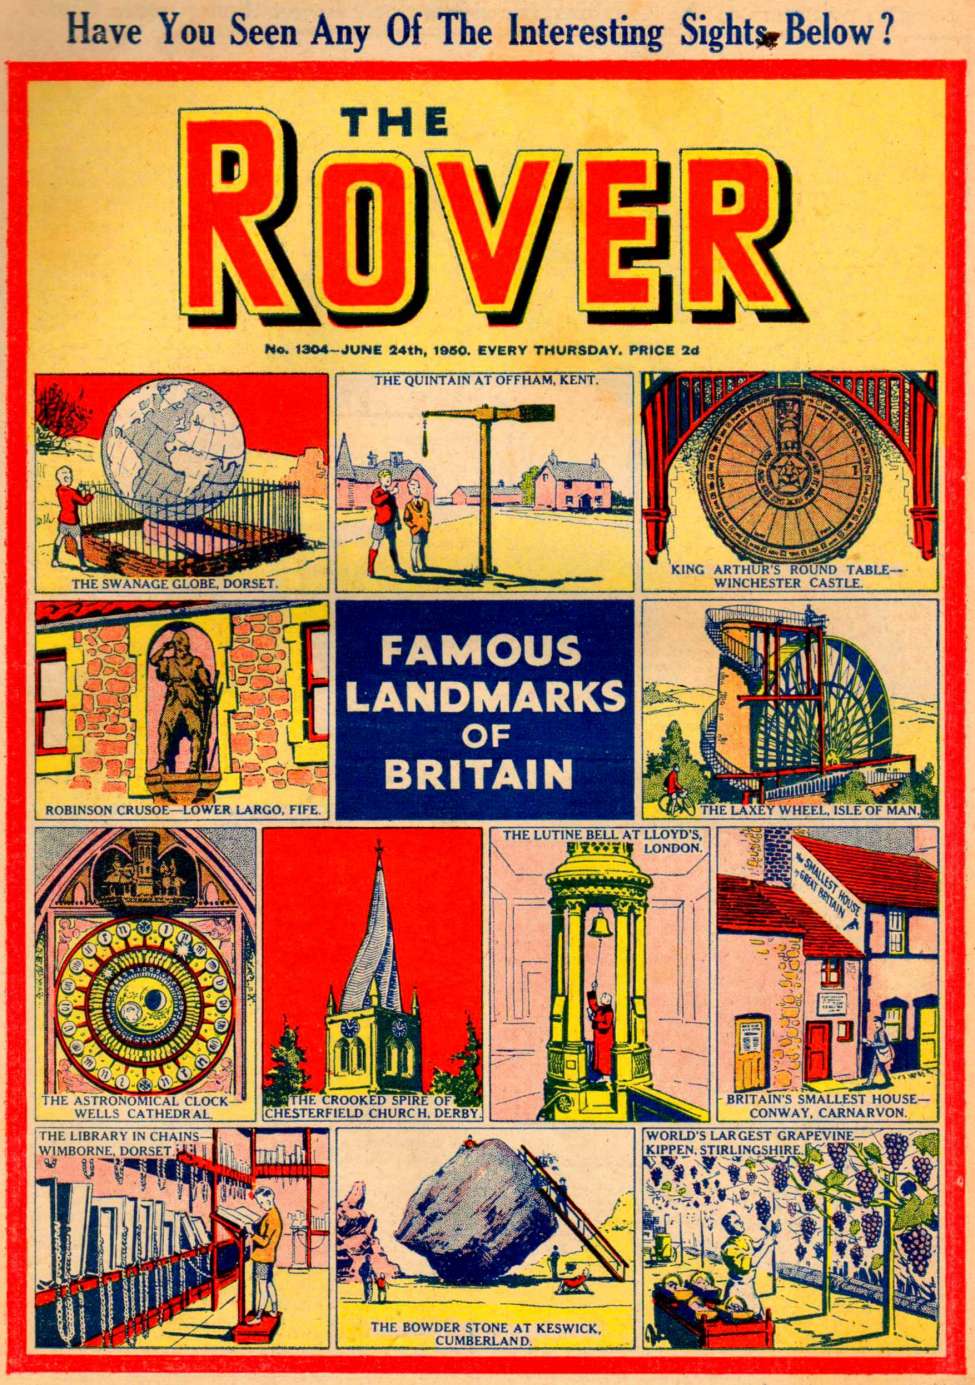 Book Cover For The Rover 1304